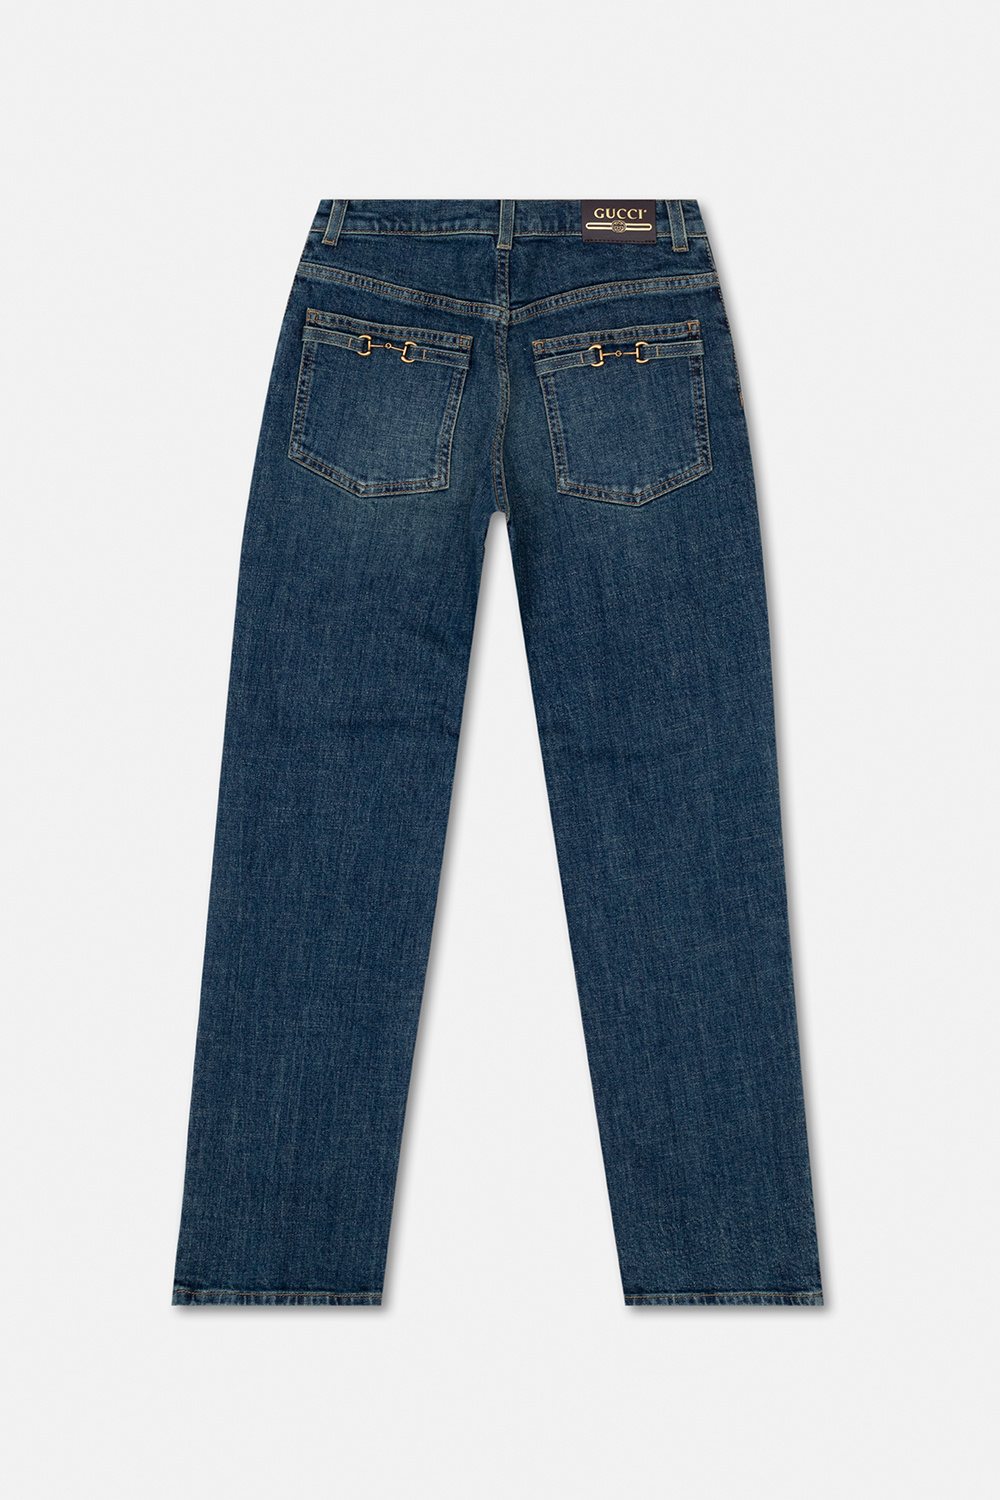 gucci Outing Kids Horsebit jeans